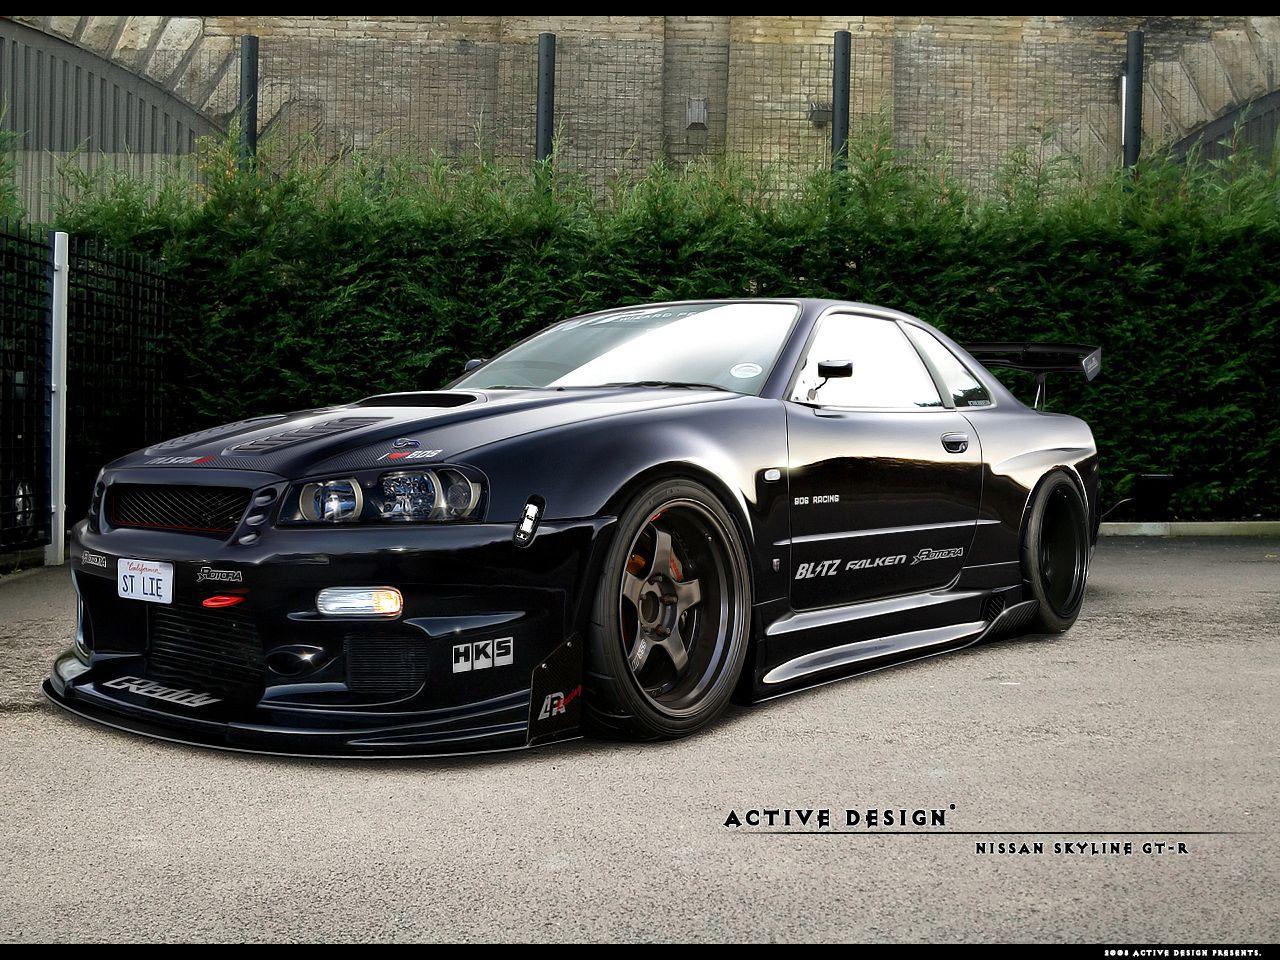 Nissan Skyline R33 Wallpapers Top Free Nissan Skyline R33 Backgrounds Wallpaperaccess